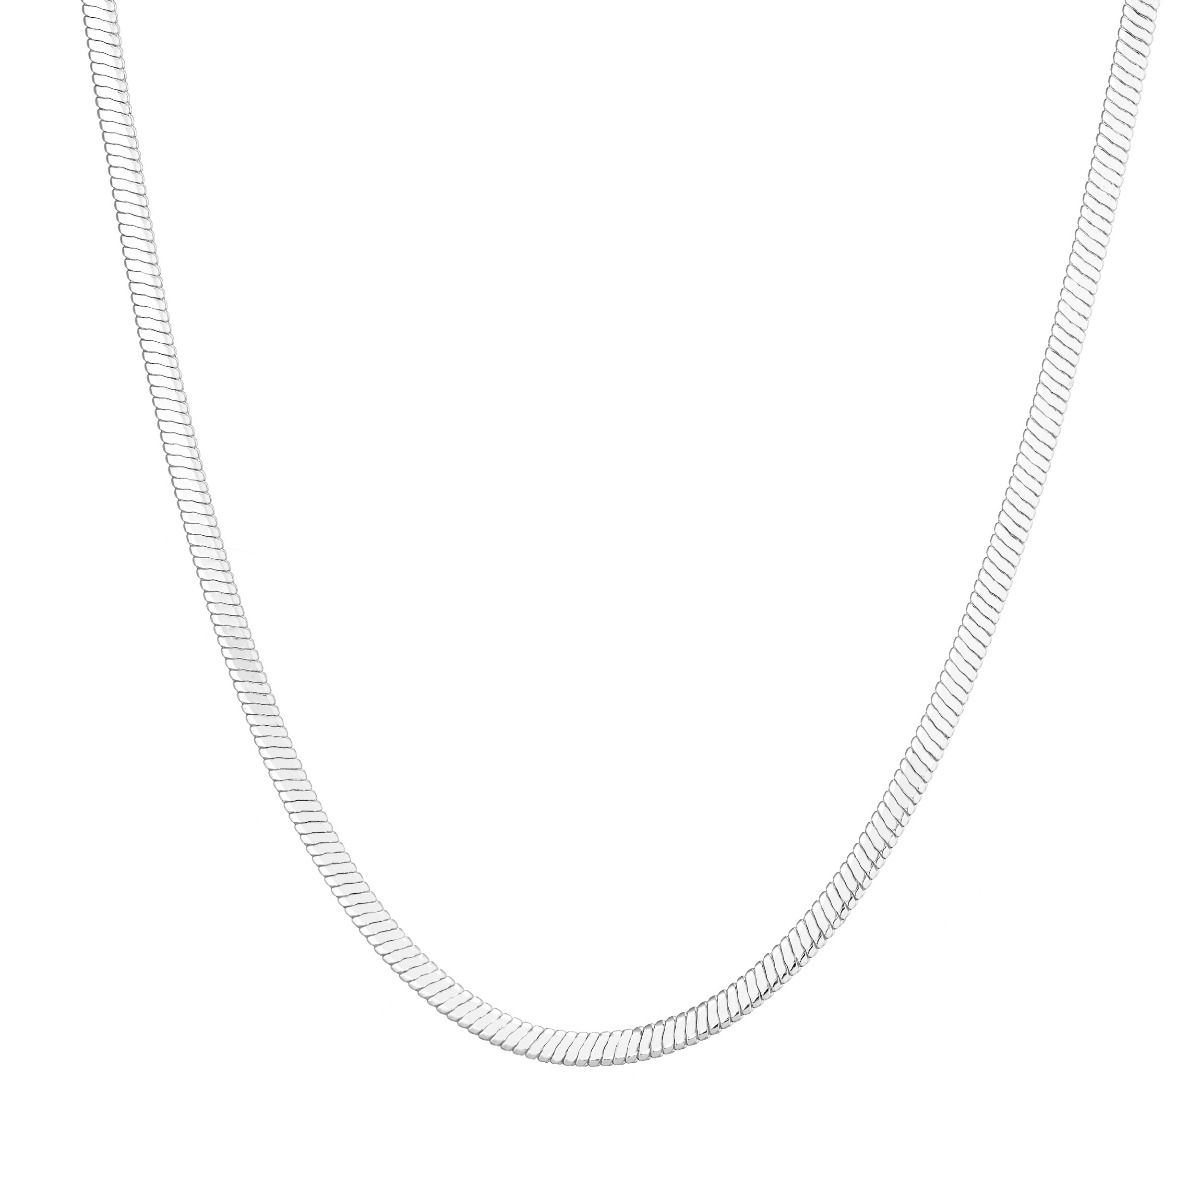 Hepburn Silver Snake Chain Necklace